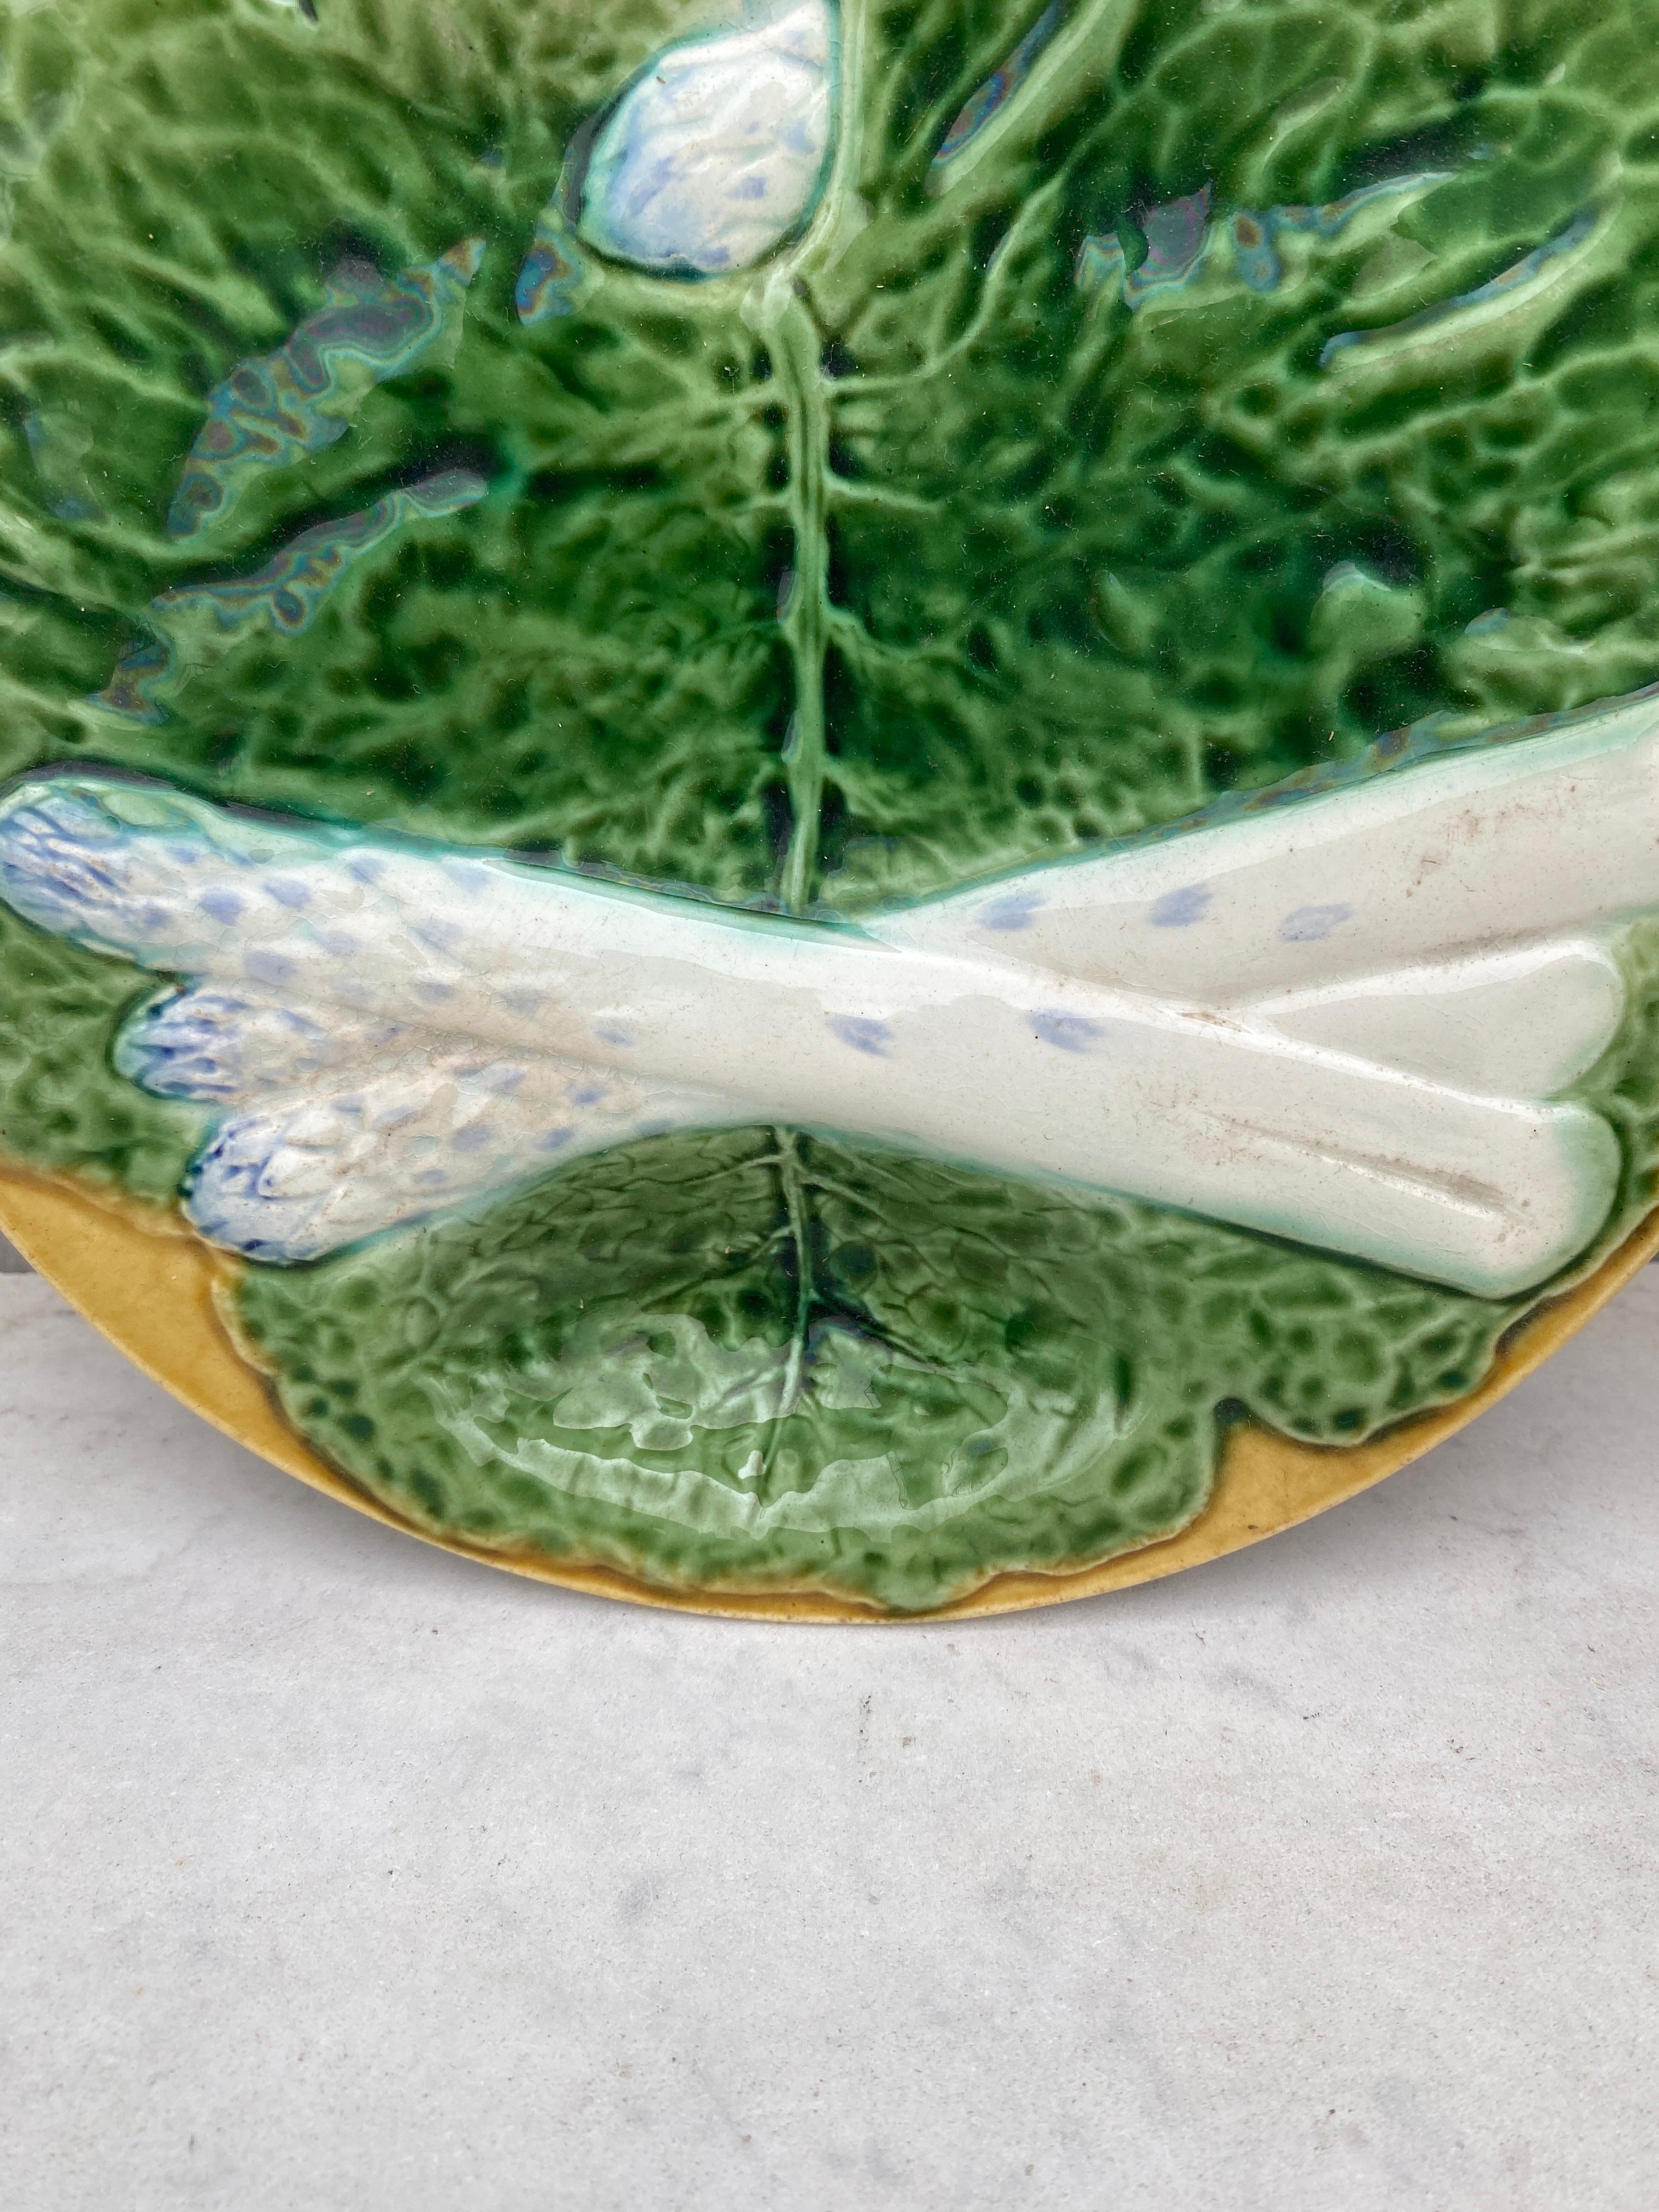 Country 19th Century Majolica Asparagus Plate with Cabbage Leaves Creil & Montereau For Sale